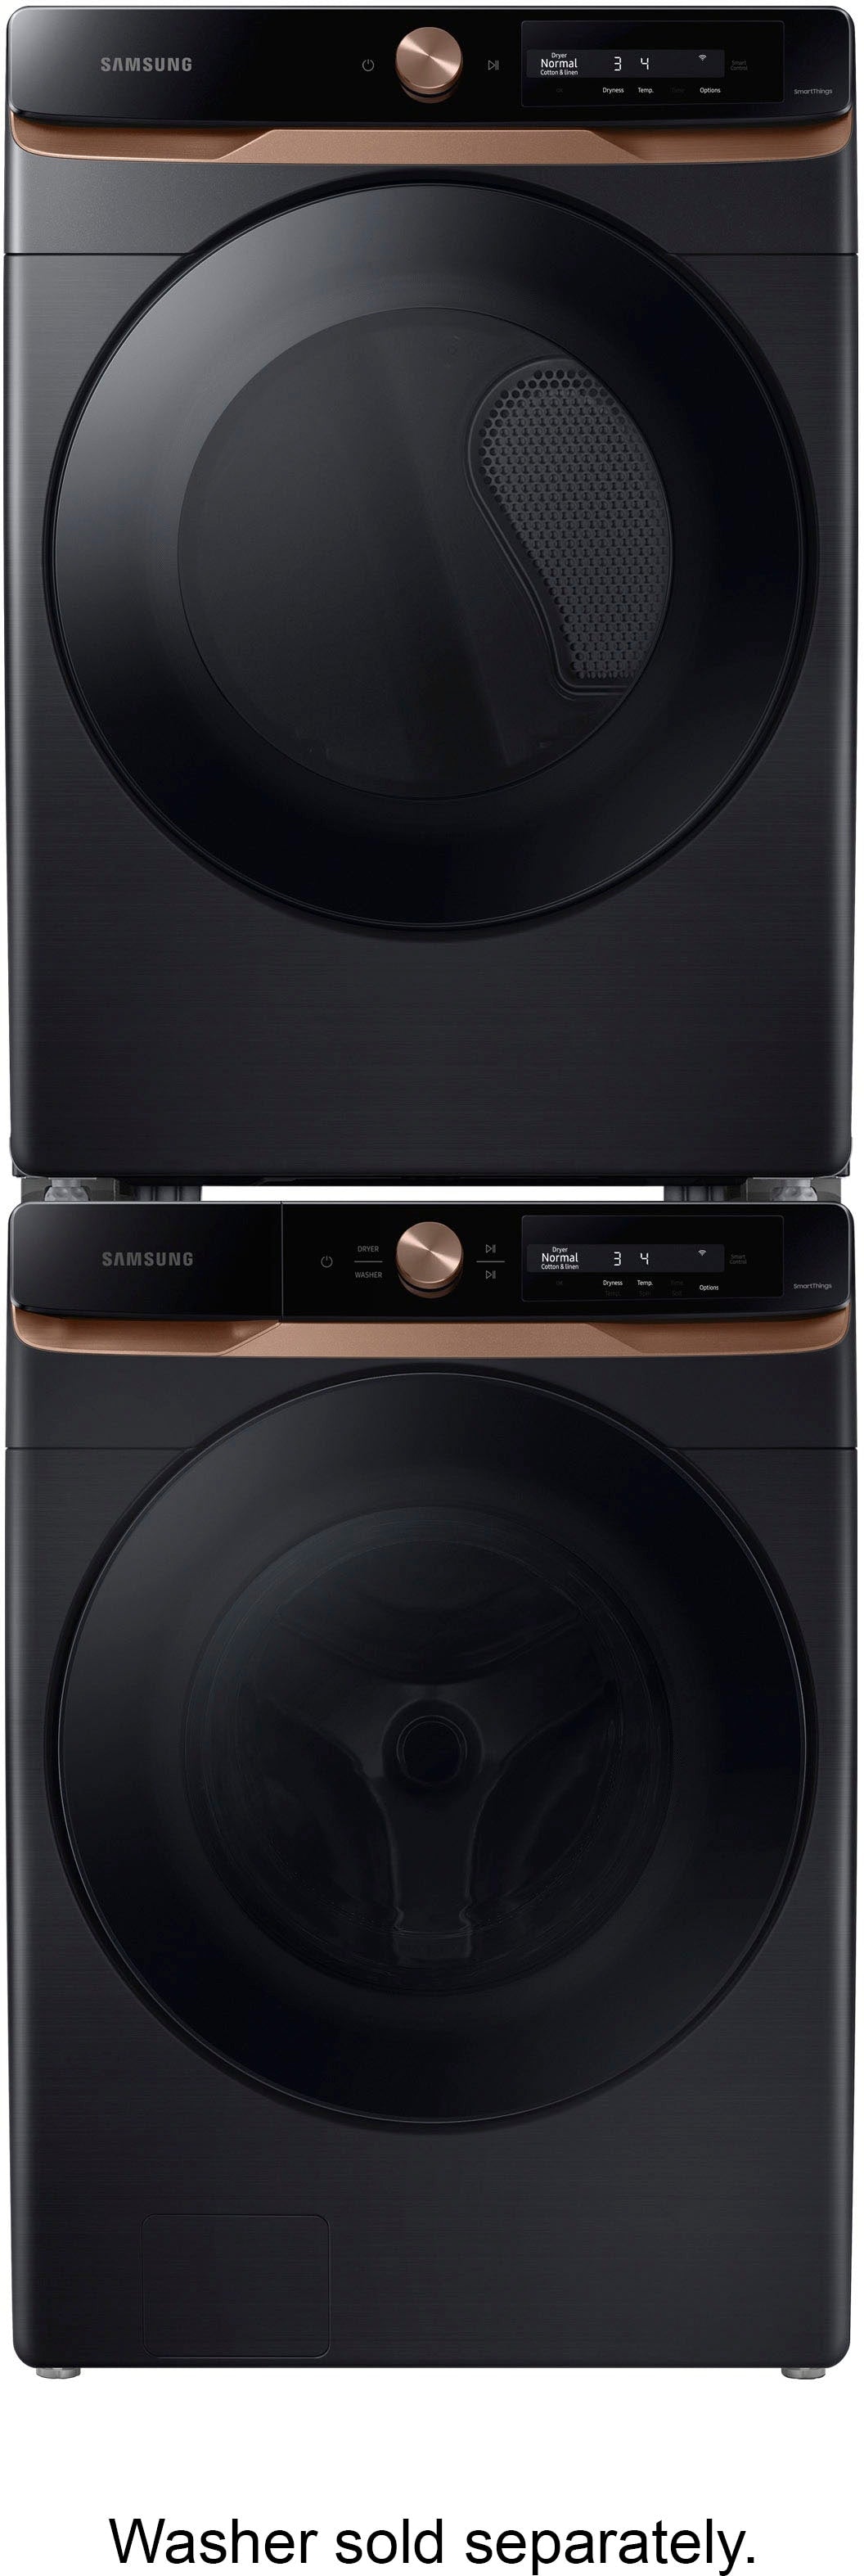 Samsung - 4.6 cu. ft. Large Capacity AI Smart Dial Front Load Washer with Auto Dispense and Super Speed Wash - Brushed black_4